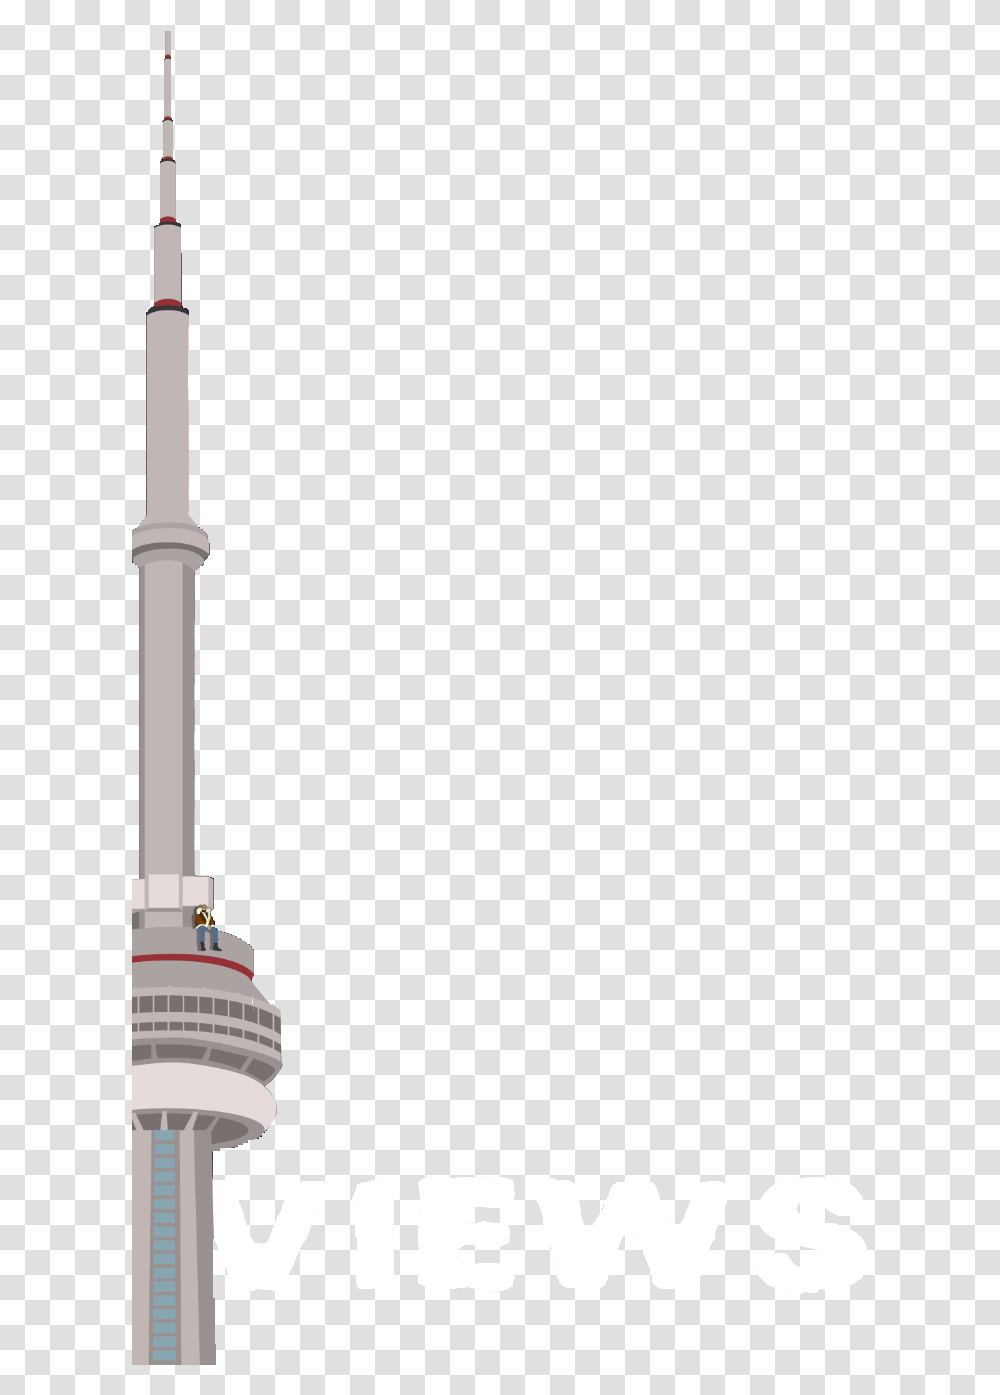 Drake Views, Architecture, Building, Tower, Spire Transparent Png